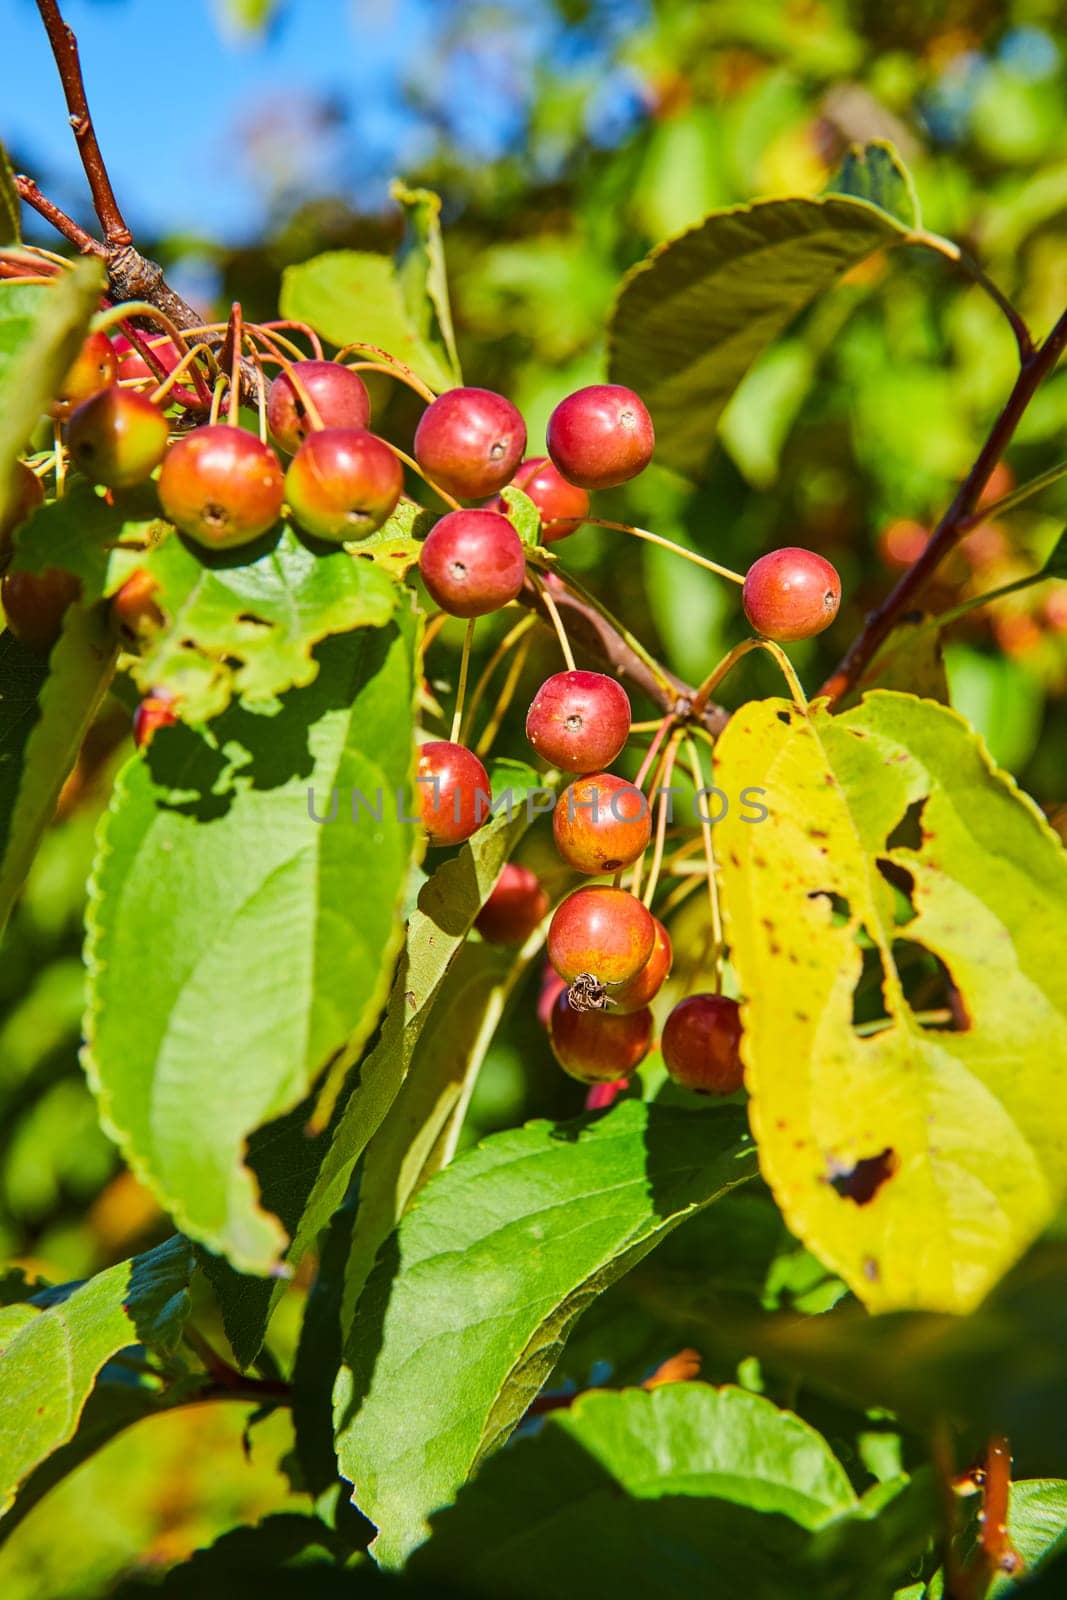 Autumnal Harvest in Elkhart Botanic Gardens, Indiana - Glossy ripe berries amidst changing leaves under midday sun